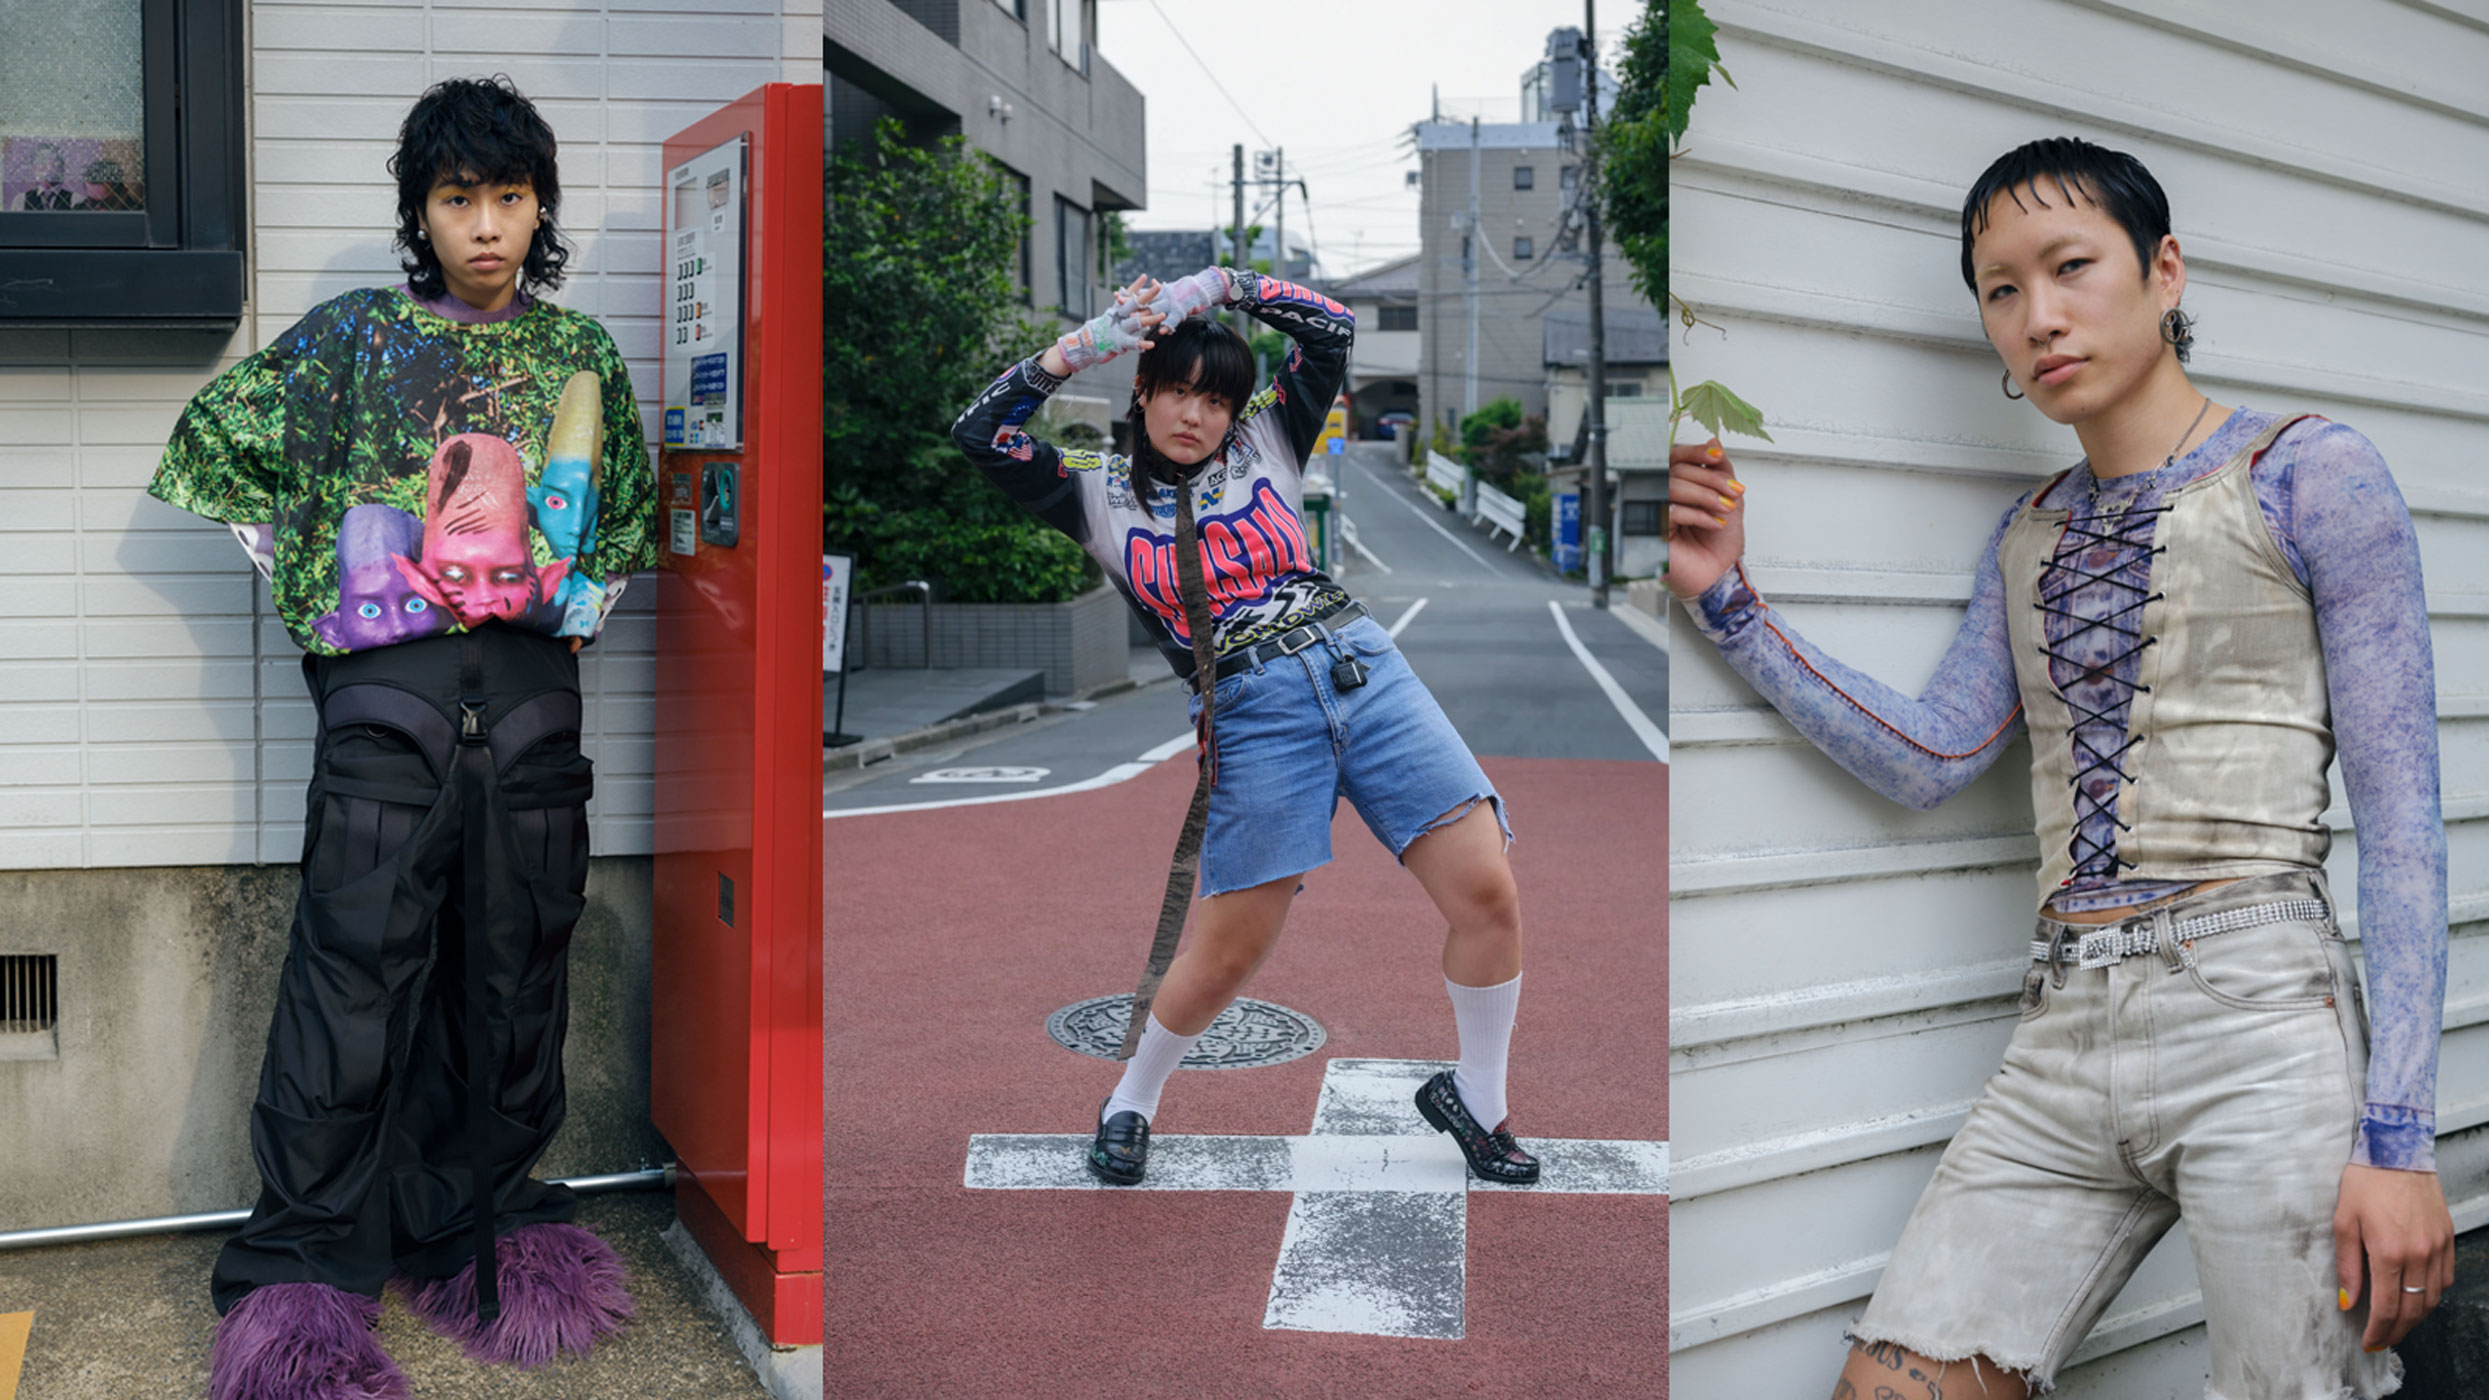 Takashi Homma photographs Tokyos resilient young queer community